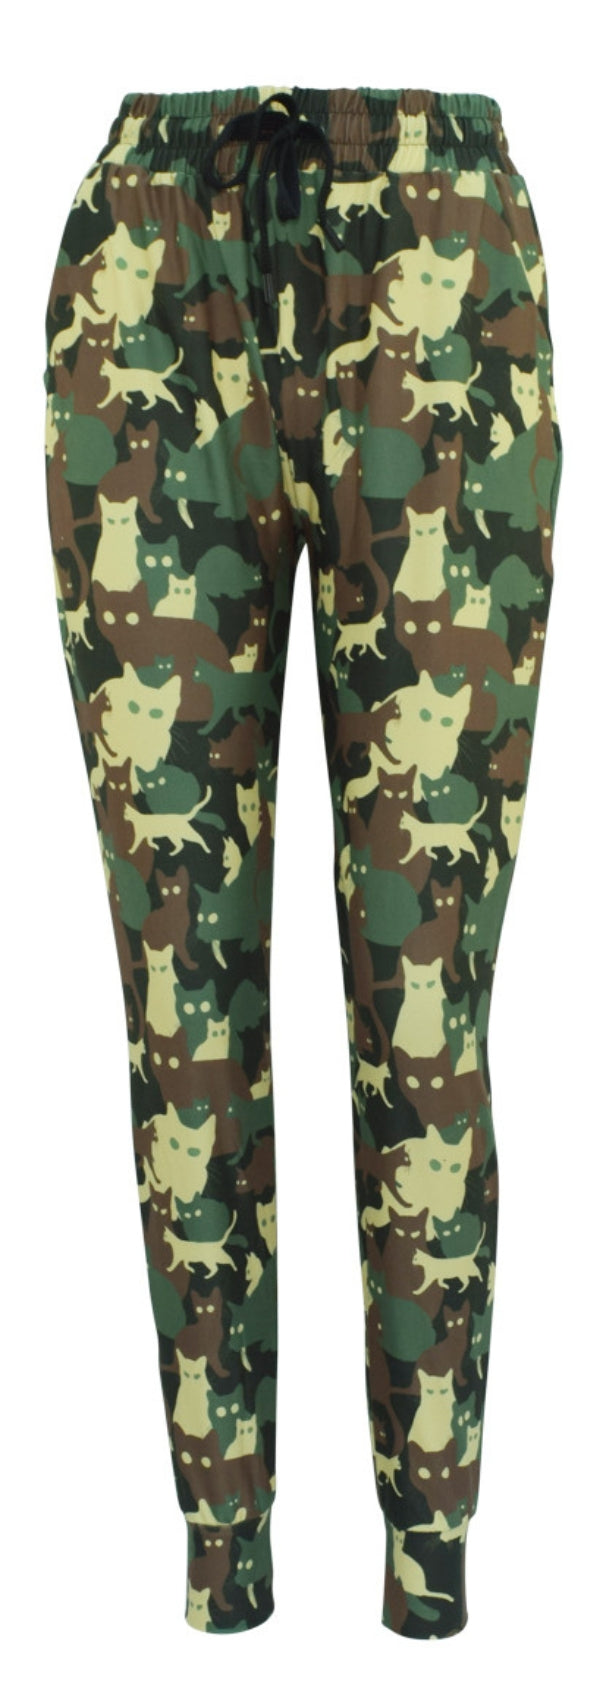 Catoflage Lejoggers-Joggers